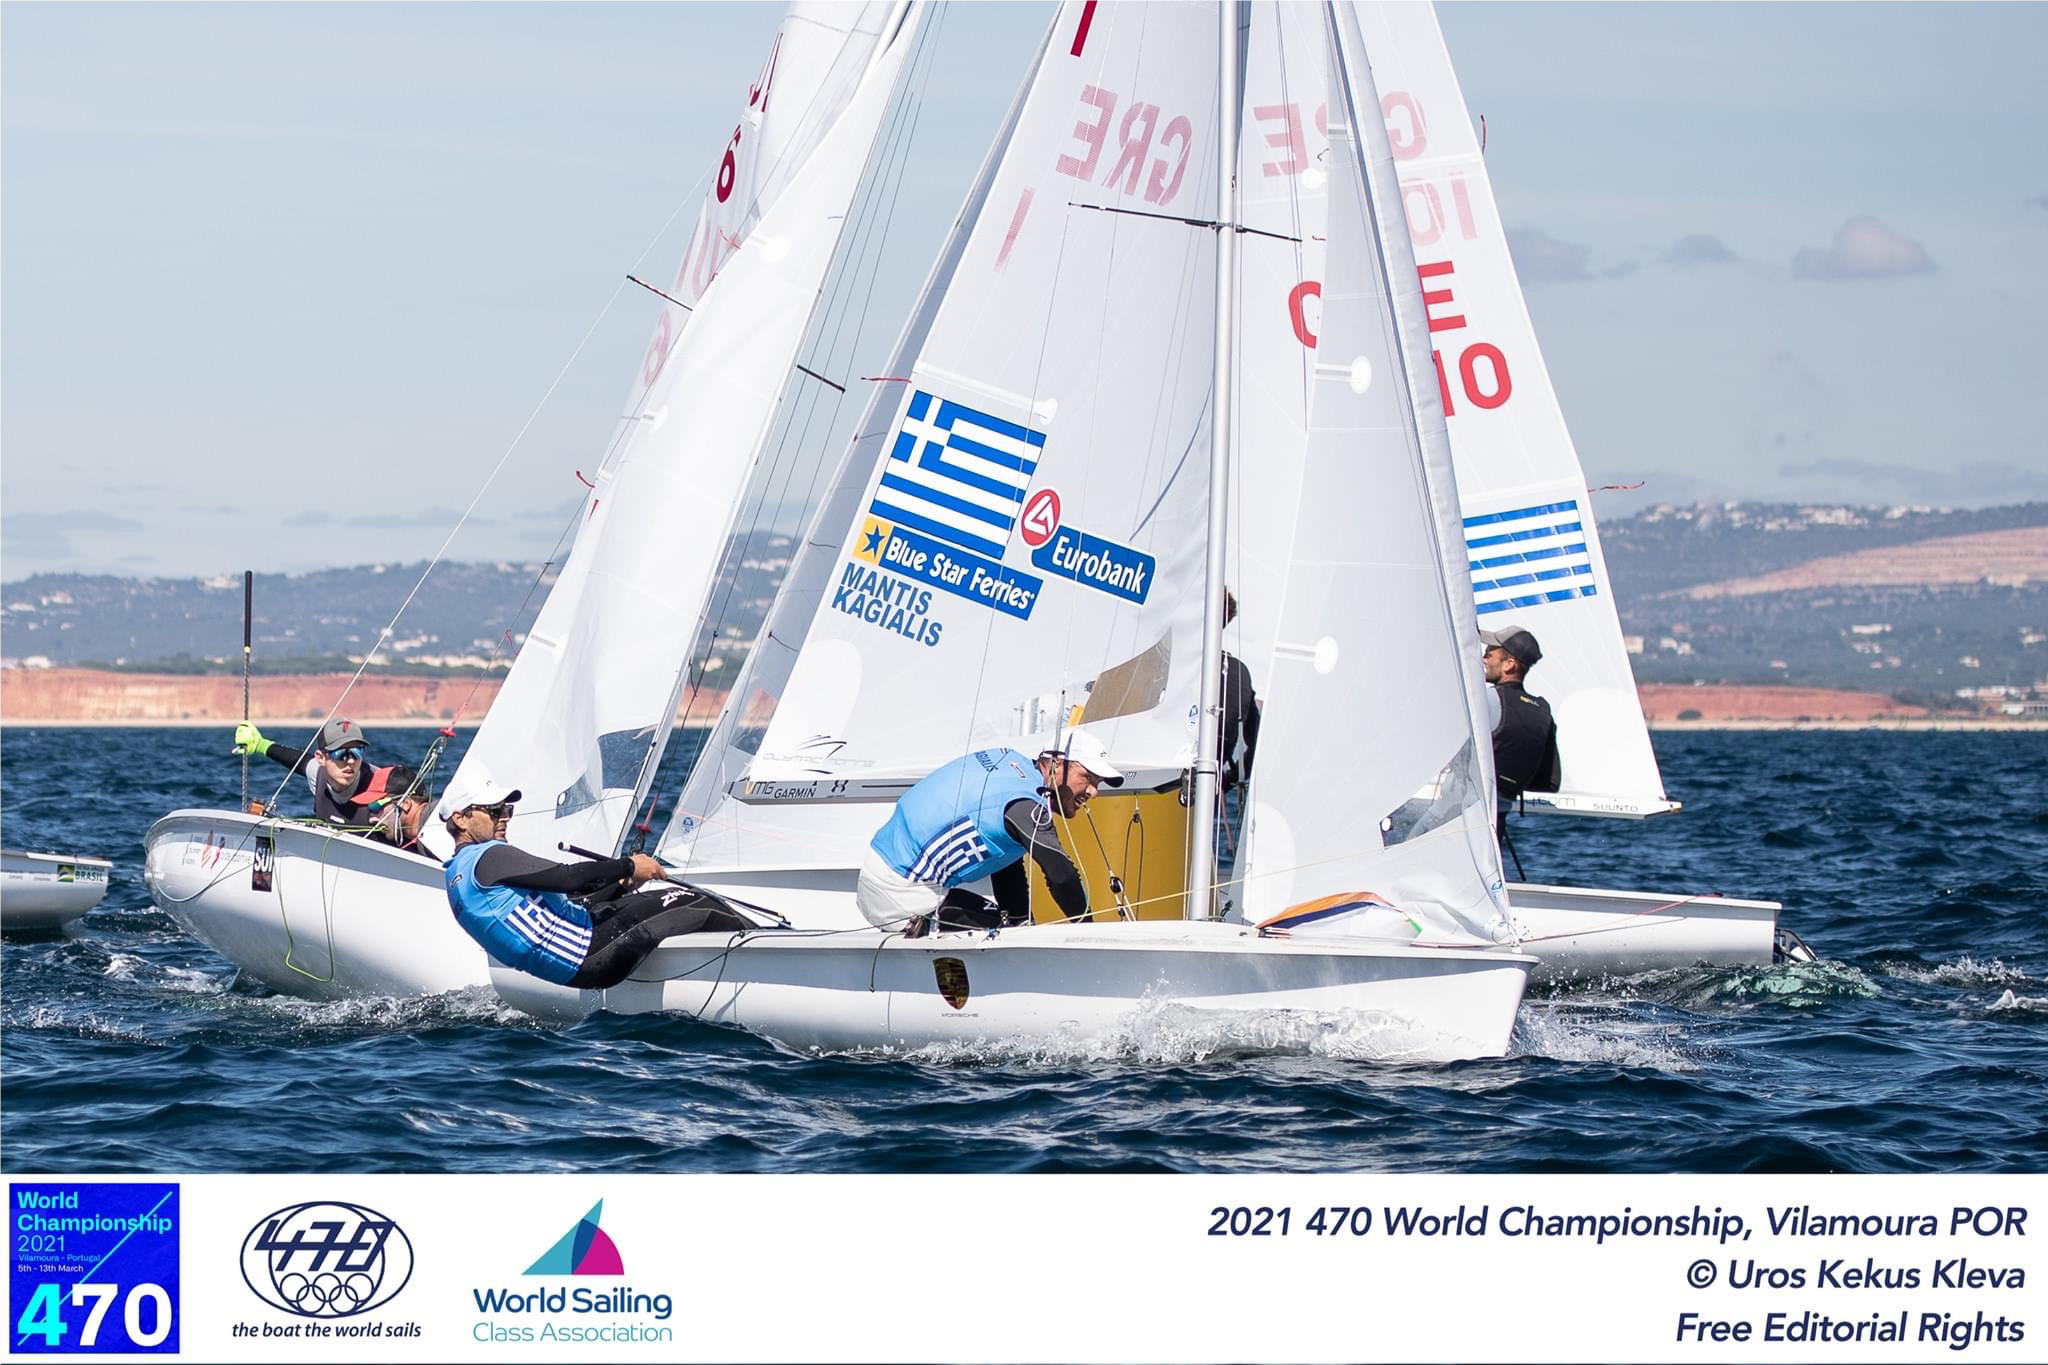 BLUE STAR FERRIES Congratulates the sailing crew of Panagiotis Mantis and Pavlos Kagialis on their qualification for the Tokyo Olympics